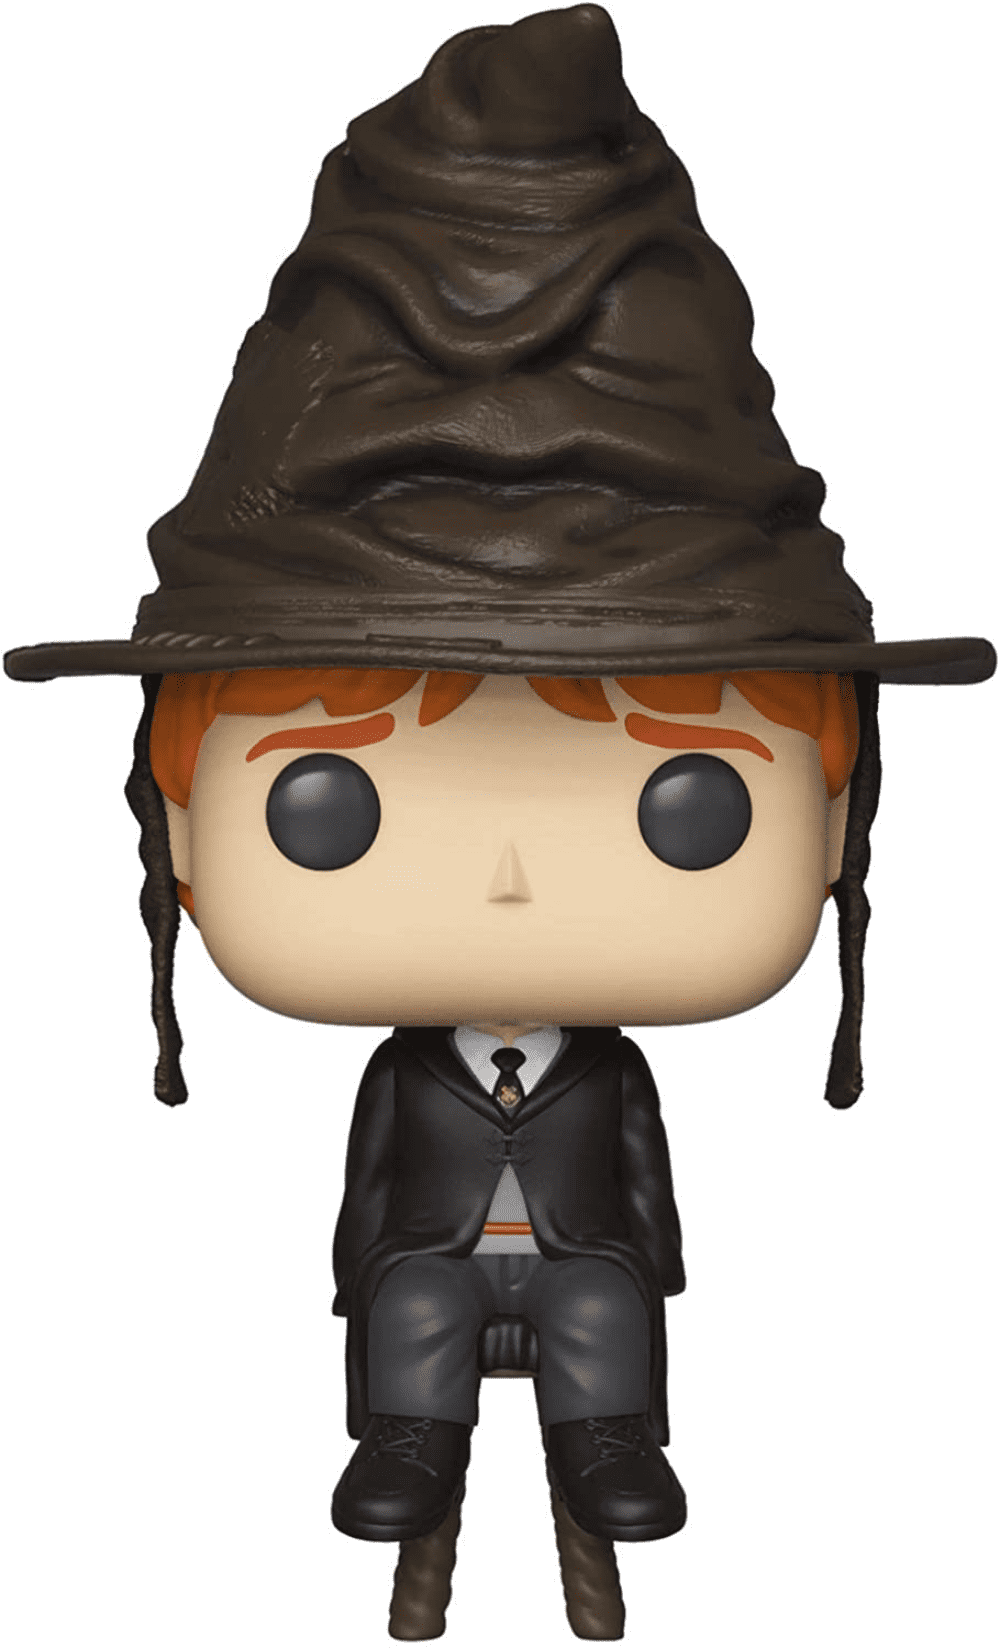 Funko POP!Harry Potter: Ron Weasley with Sorting Hat Exclusive